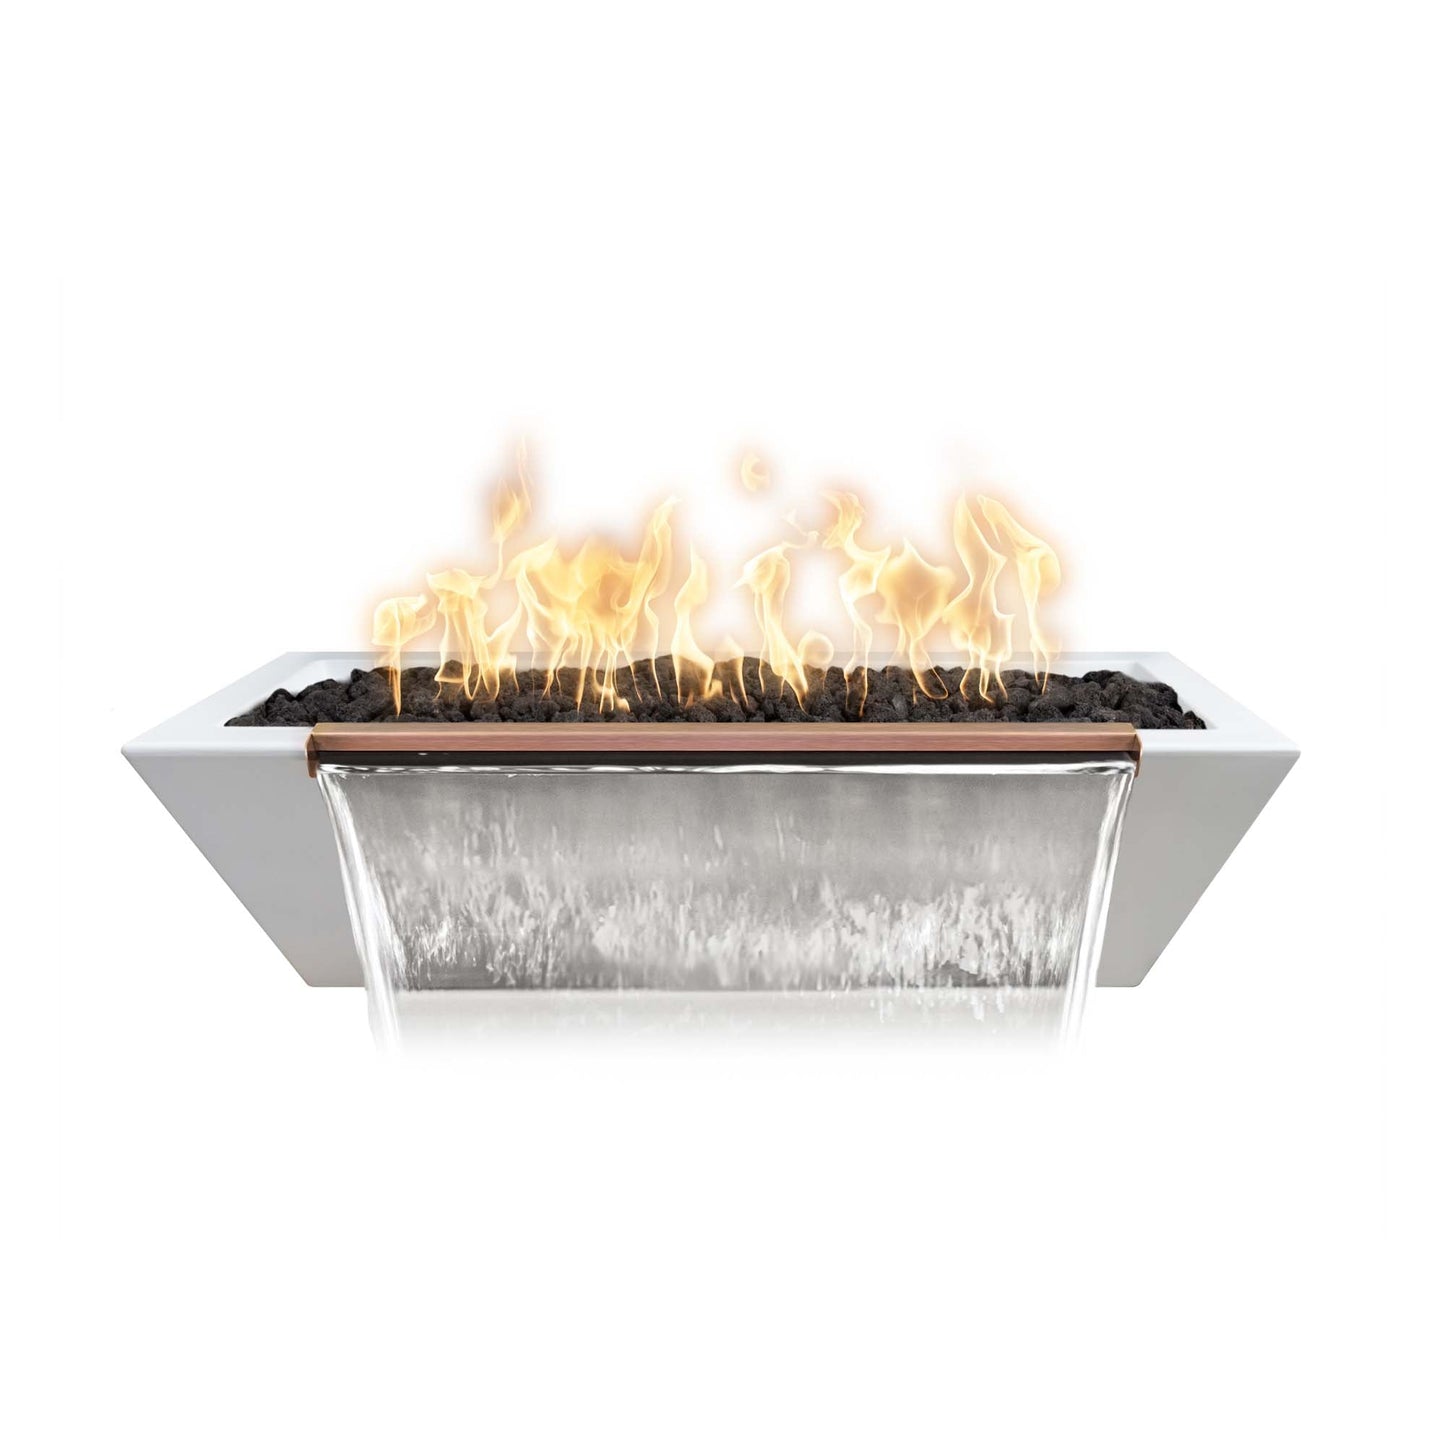 The Outdoor Plus Linear Maya 60" Metallic Copper GFRC Concrete Liquid Propane Fire & Water Bowl with Match Lit Ignition